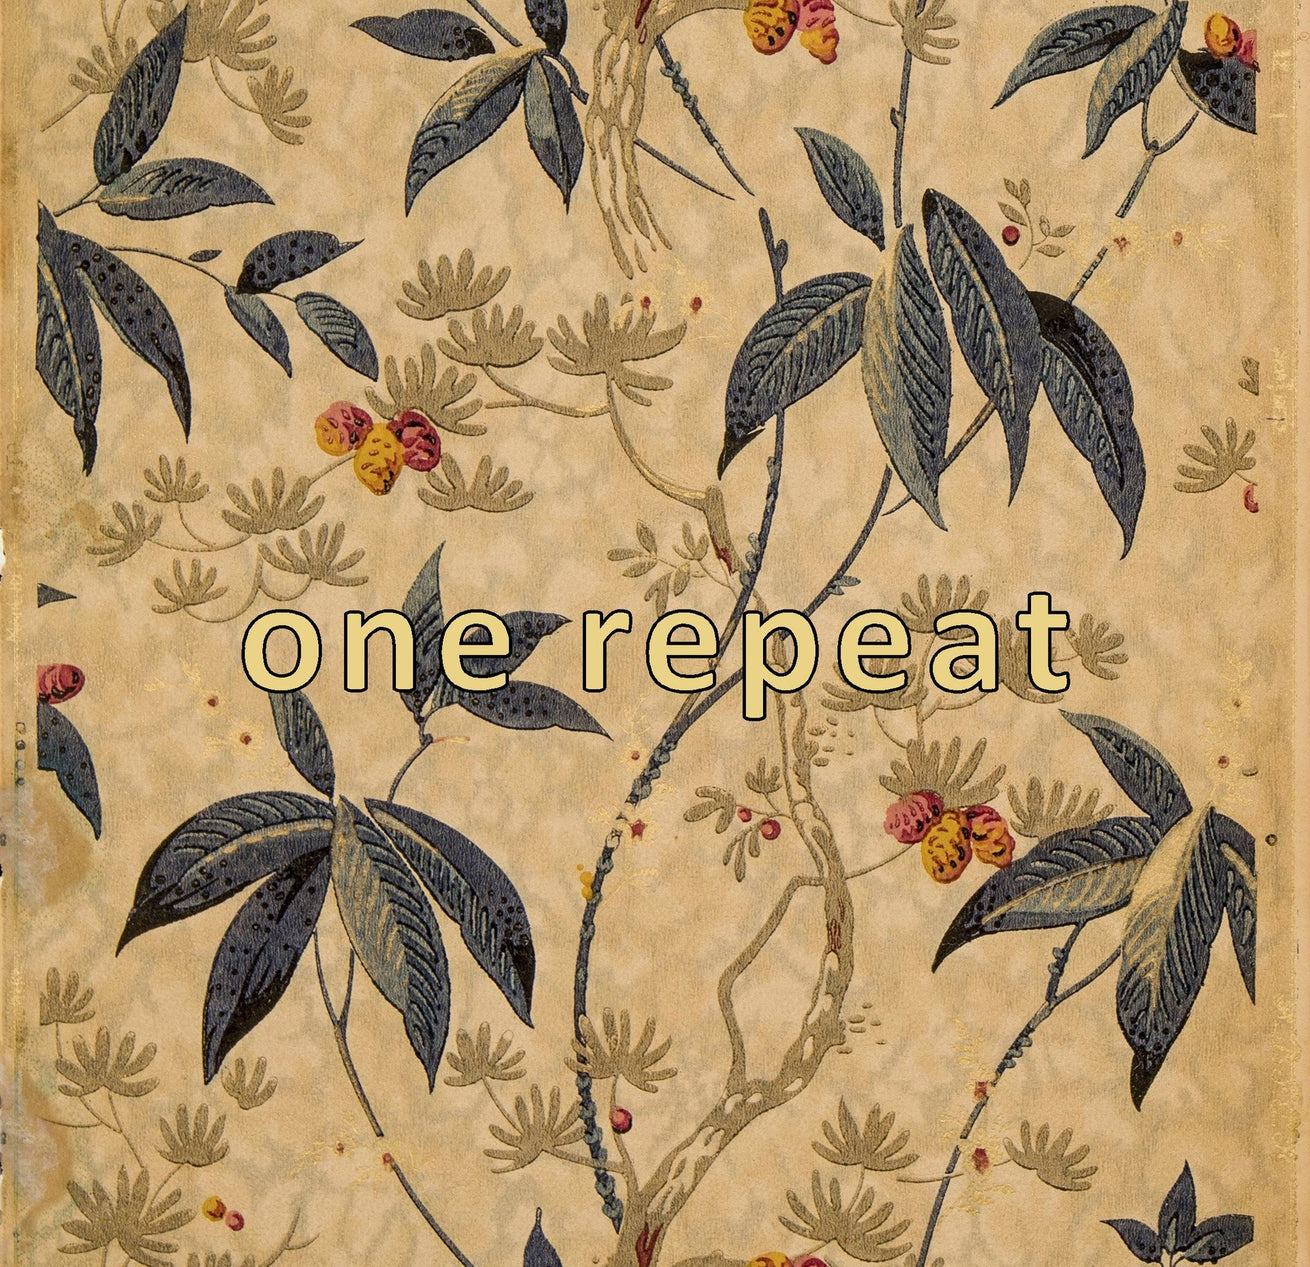 Stylized Twining Branches and Leaves - Antique Wallpaper Remnant